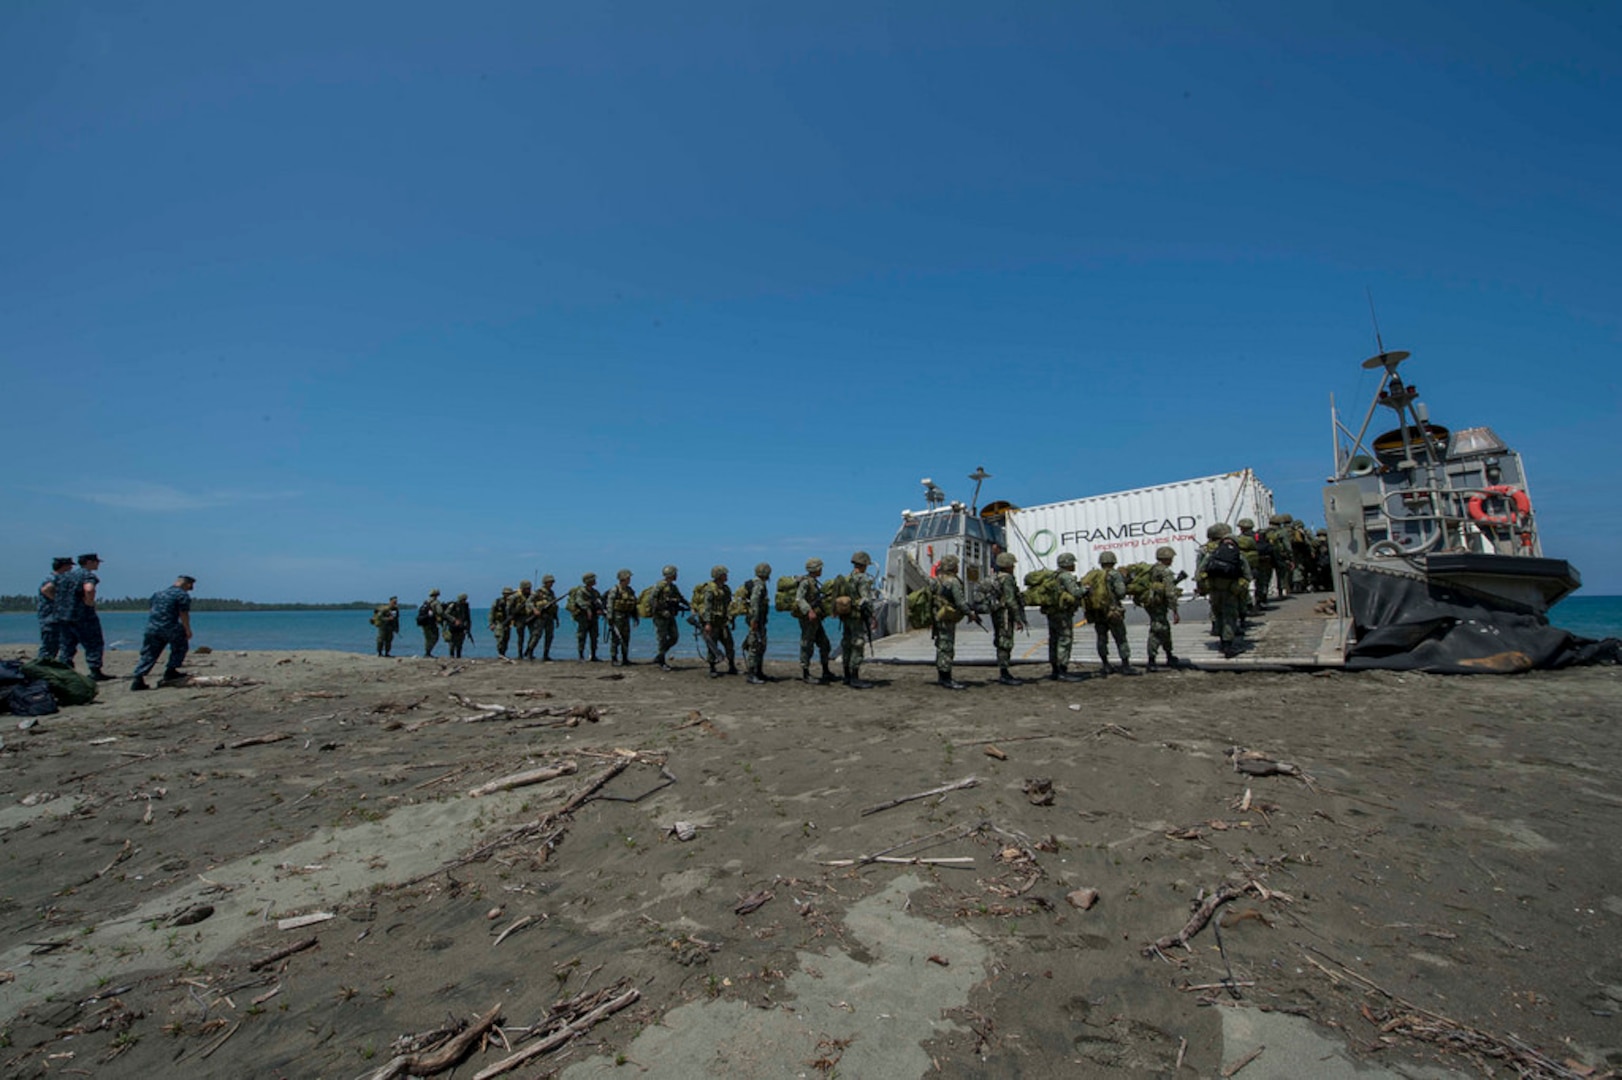 PALAWAN, Philippines (June 24, 2014) - Philippine marines file into landing craft air cushion (LCAC) 30 for transport to Whidbey Island-class amphibious dock landing ship USS Ashland (LSD 48). Ashland is participating in exercise Cooperation Afloat Readiness and Training (CARAT) 2014, a bilateral maritime exercise series between the U.S. Navy, U.S. Marine Corps and the armed forces of Bangladesh, Brunei, Cambodia, Indonesia, Malaysia, Singapore, the Philippines, Thailand and Timor-Leste.